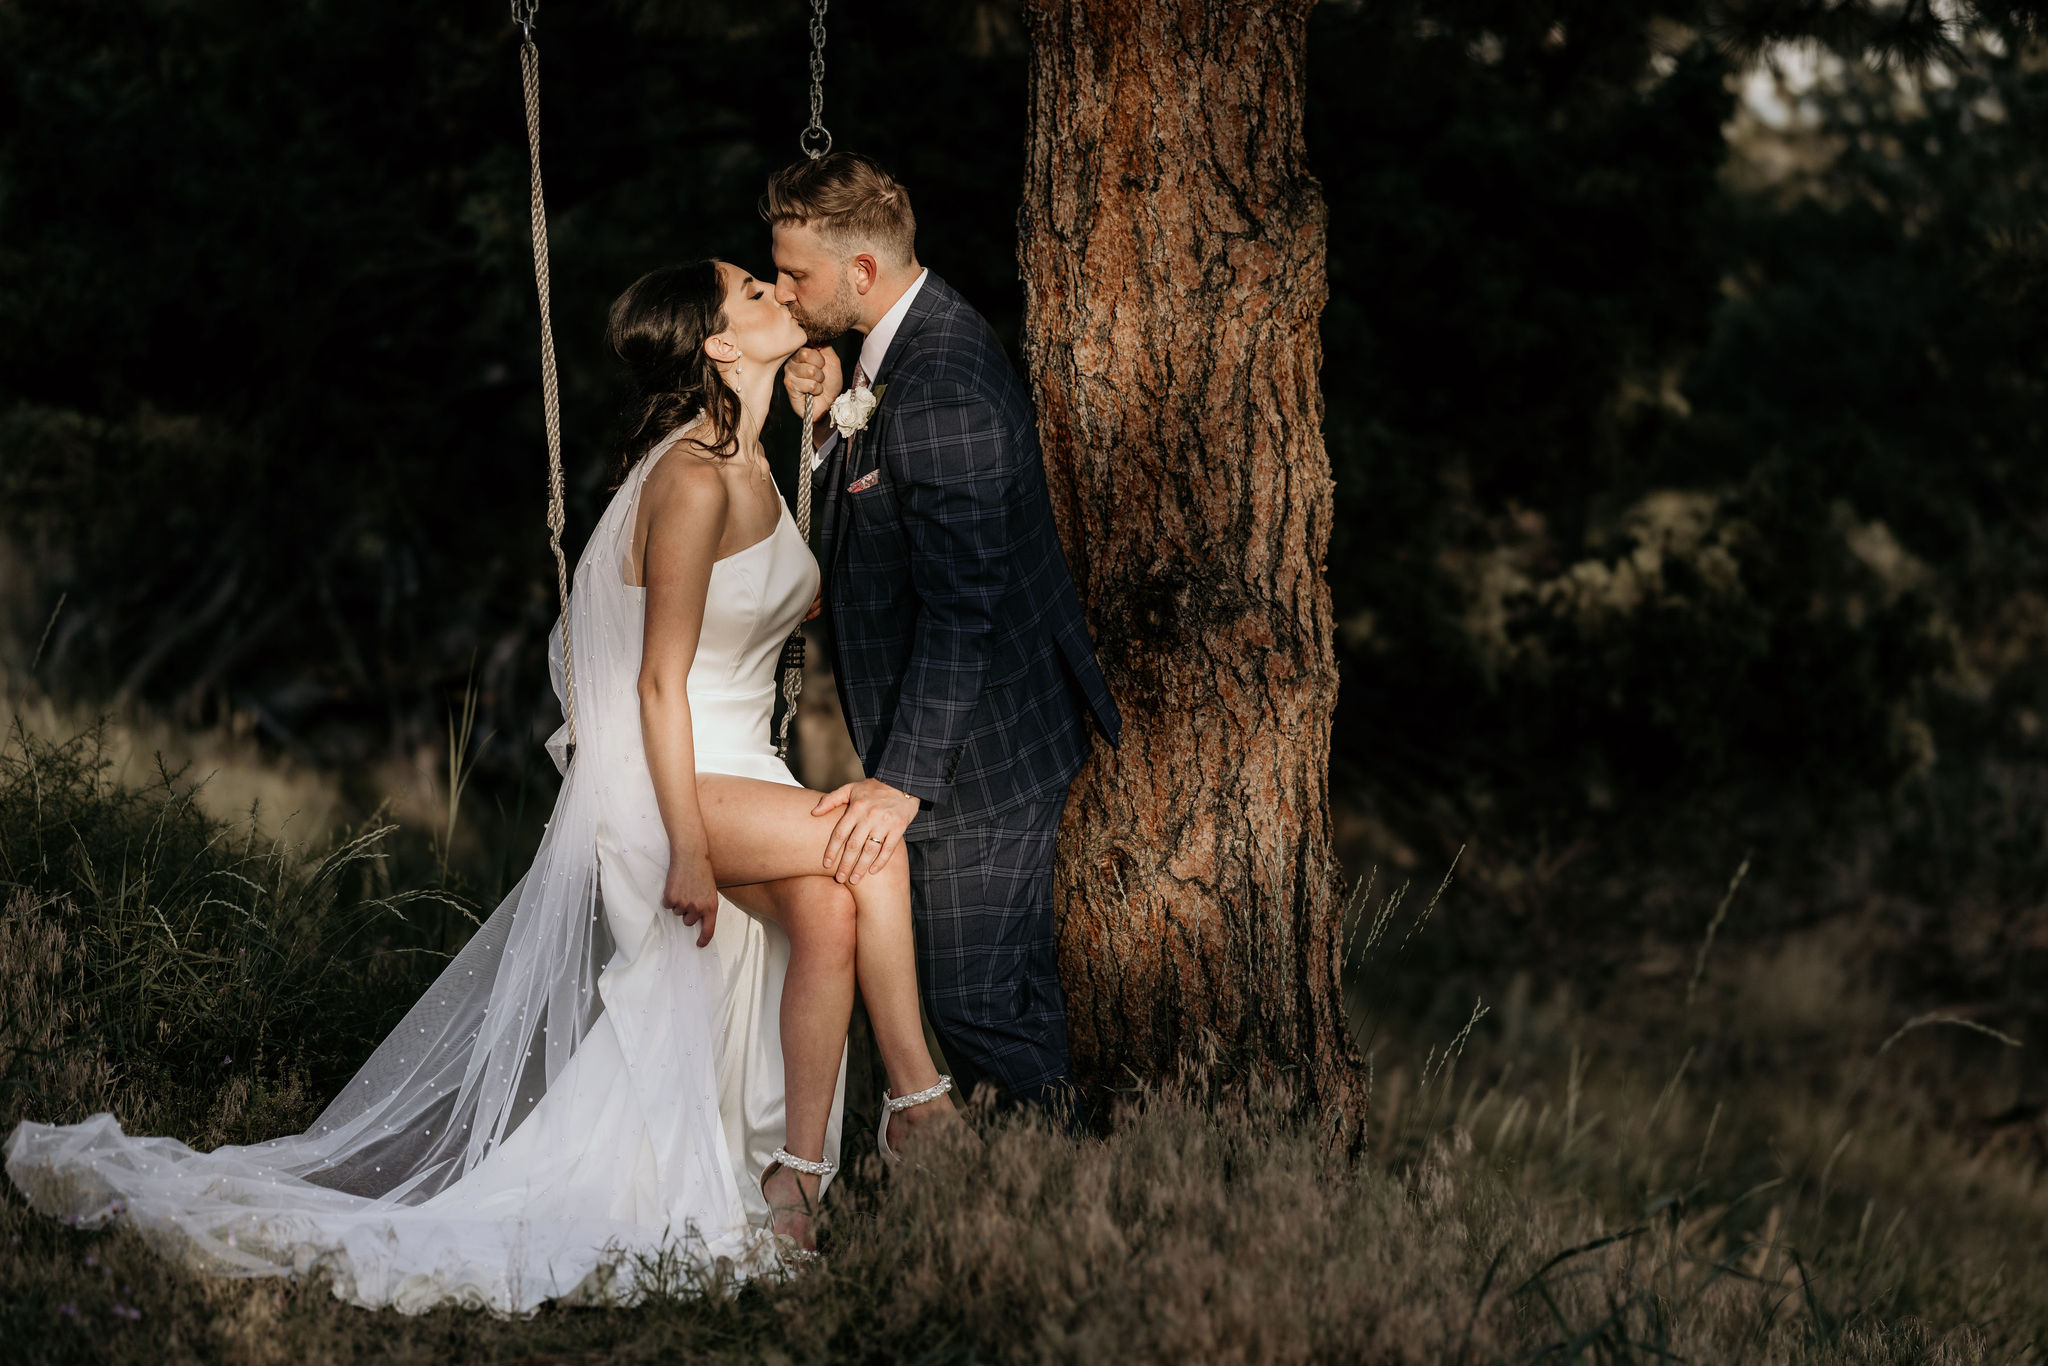 bride sits on tree swing and groom kisses her during wedding portraits.